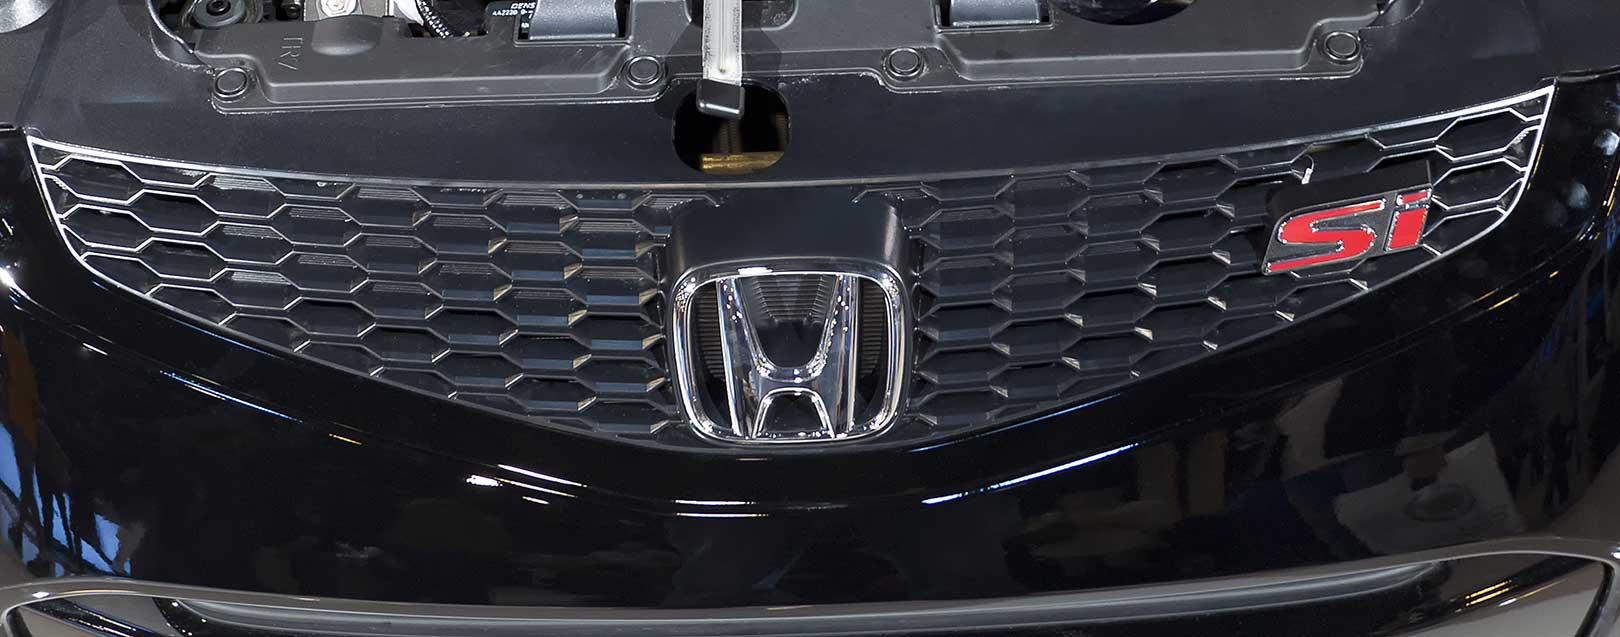 Honda component export from India to reach 1500 cr